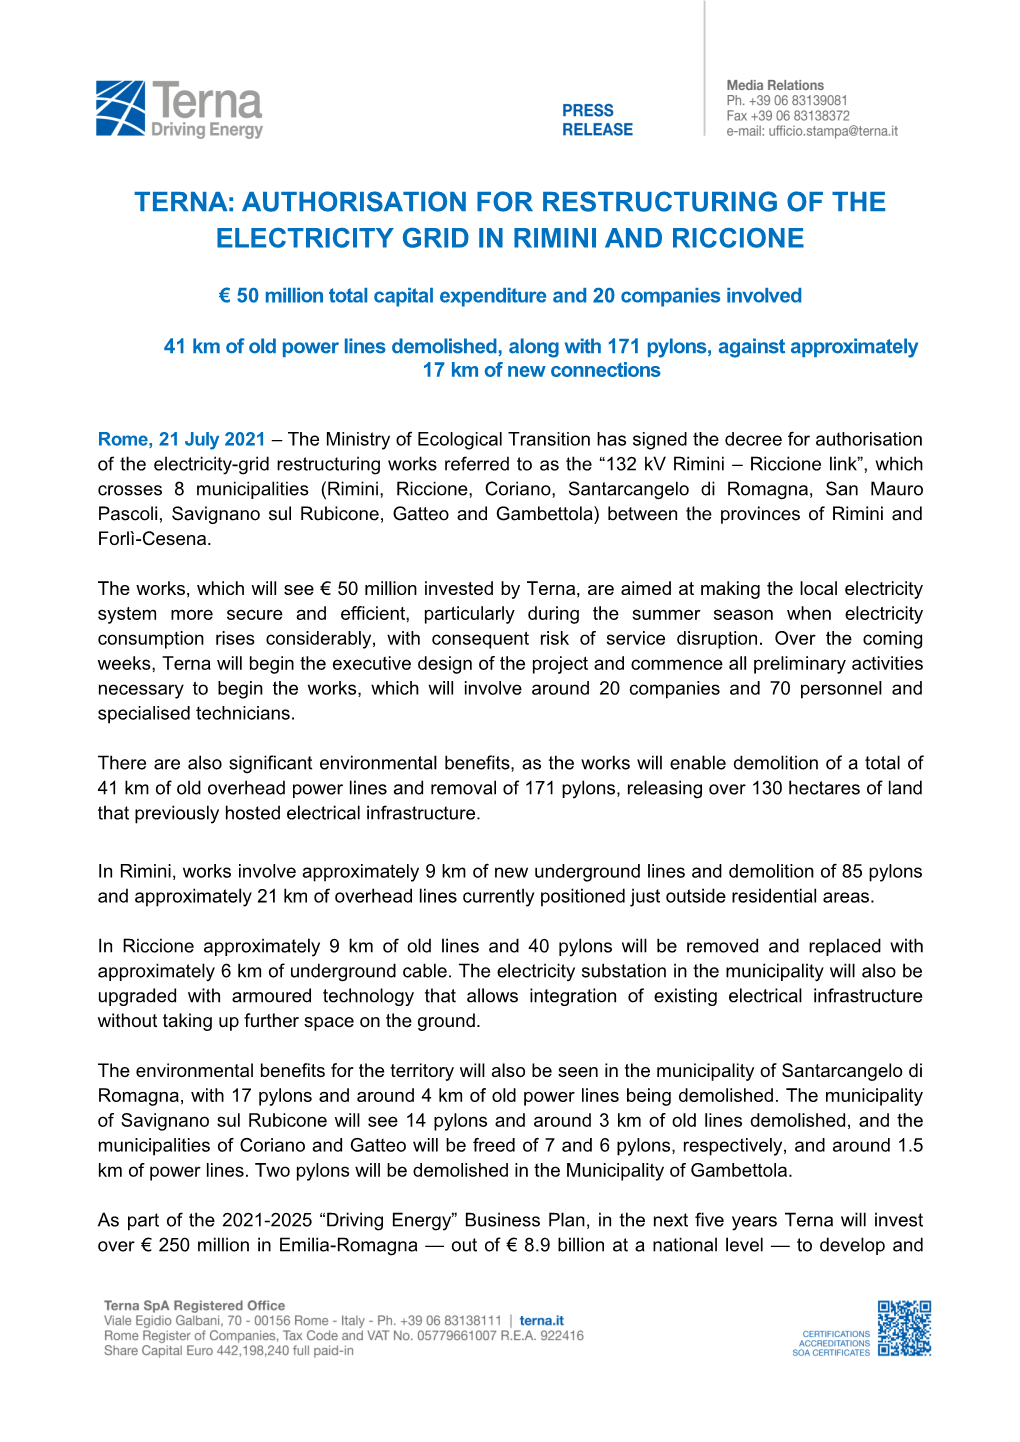 Terna: Authorisation for Restructuring of the Electricity Grid in Rimini and Riccione